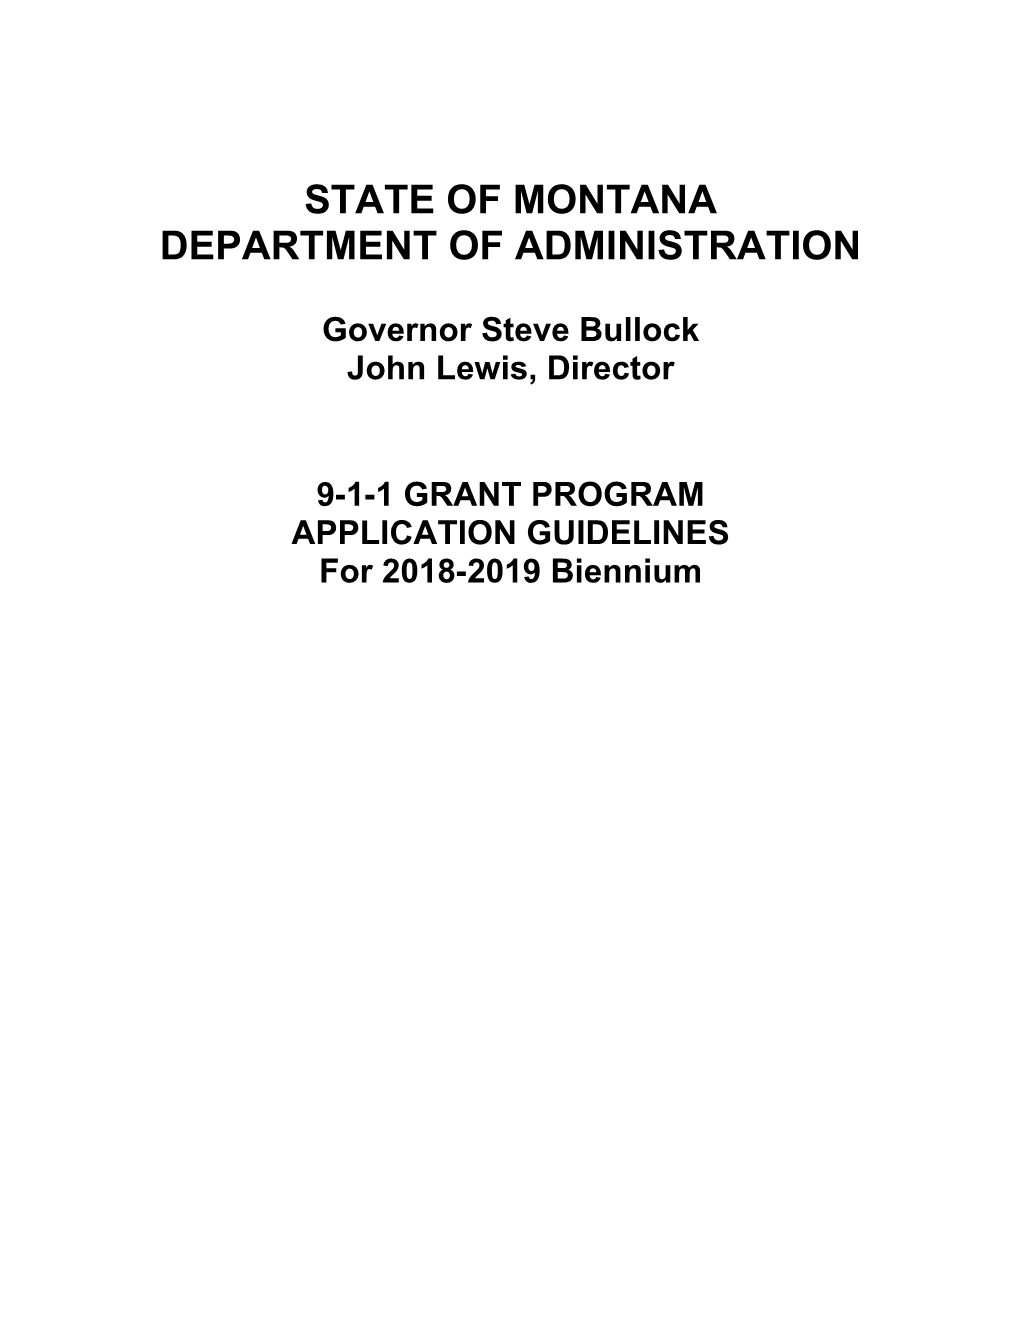 State of Montana s3